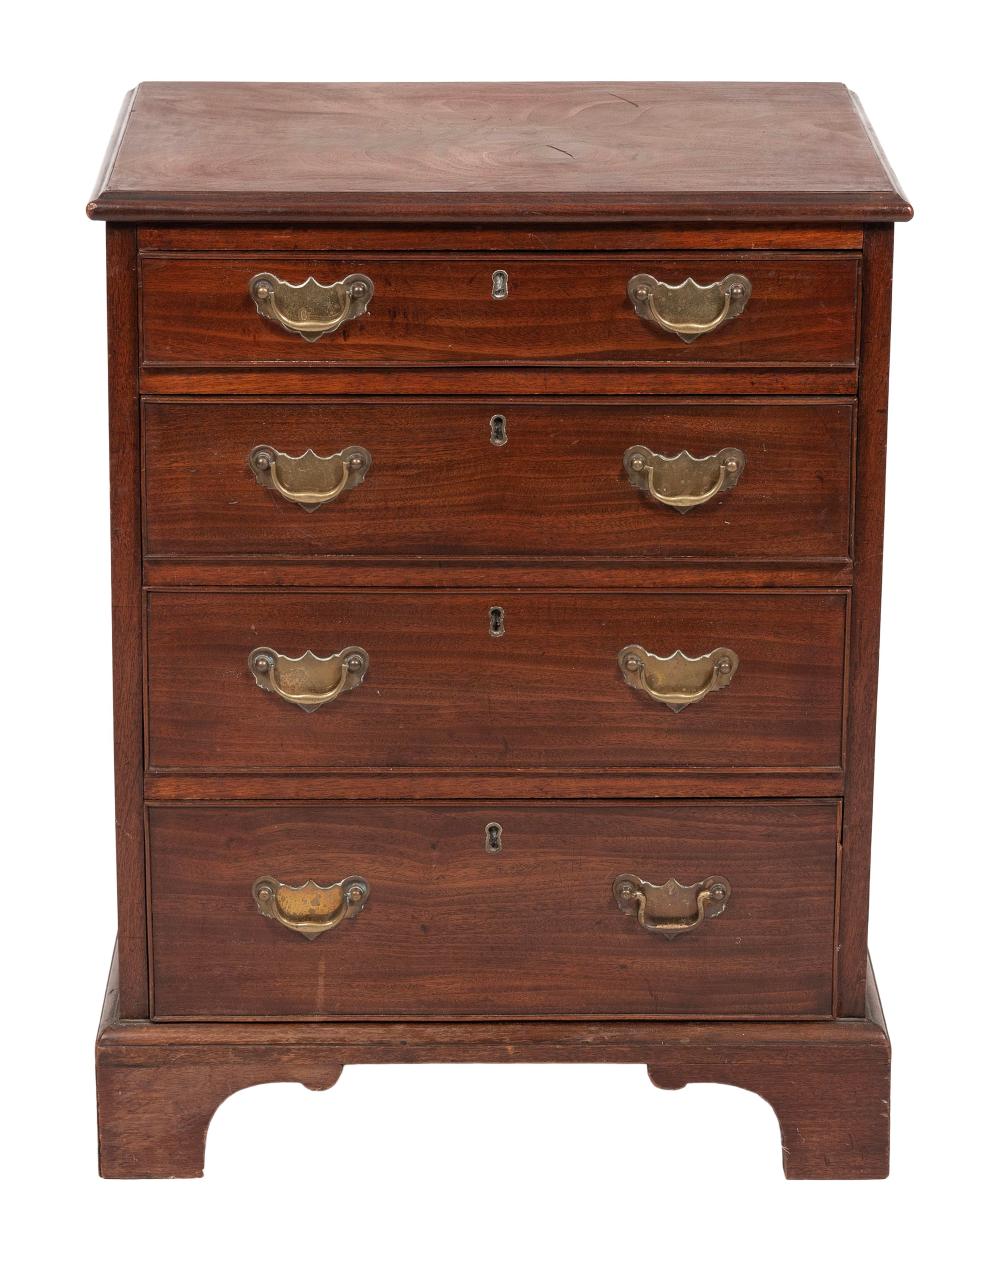 BACHELORS CHEST 19TH CENTURY HEIGHT